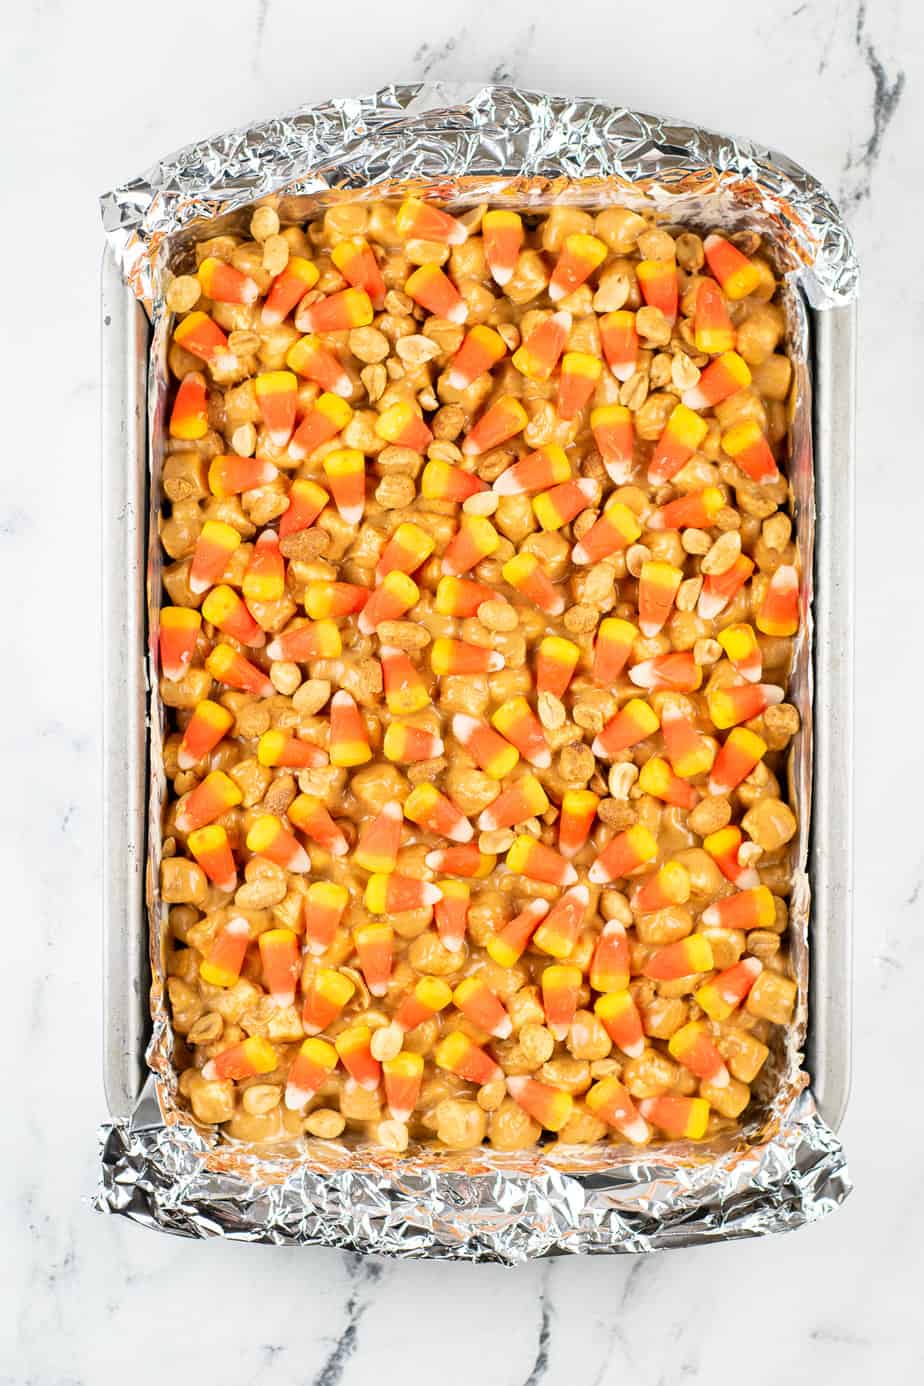 Large rectangular pan from above lined with aluminum foil and full of peanut butter marshmallow bars topped with more candy corn and peanuts.